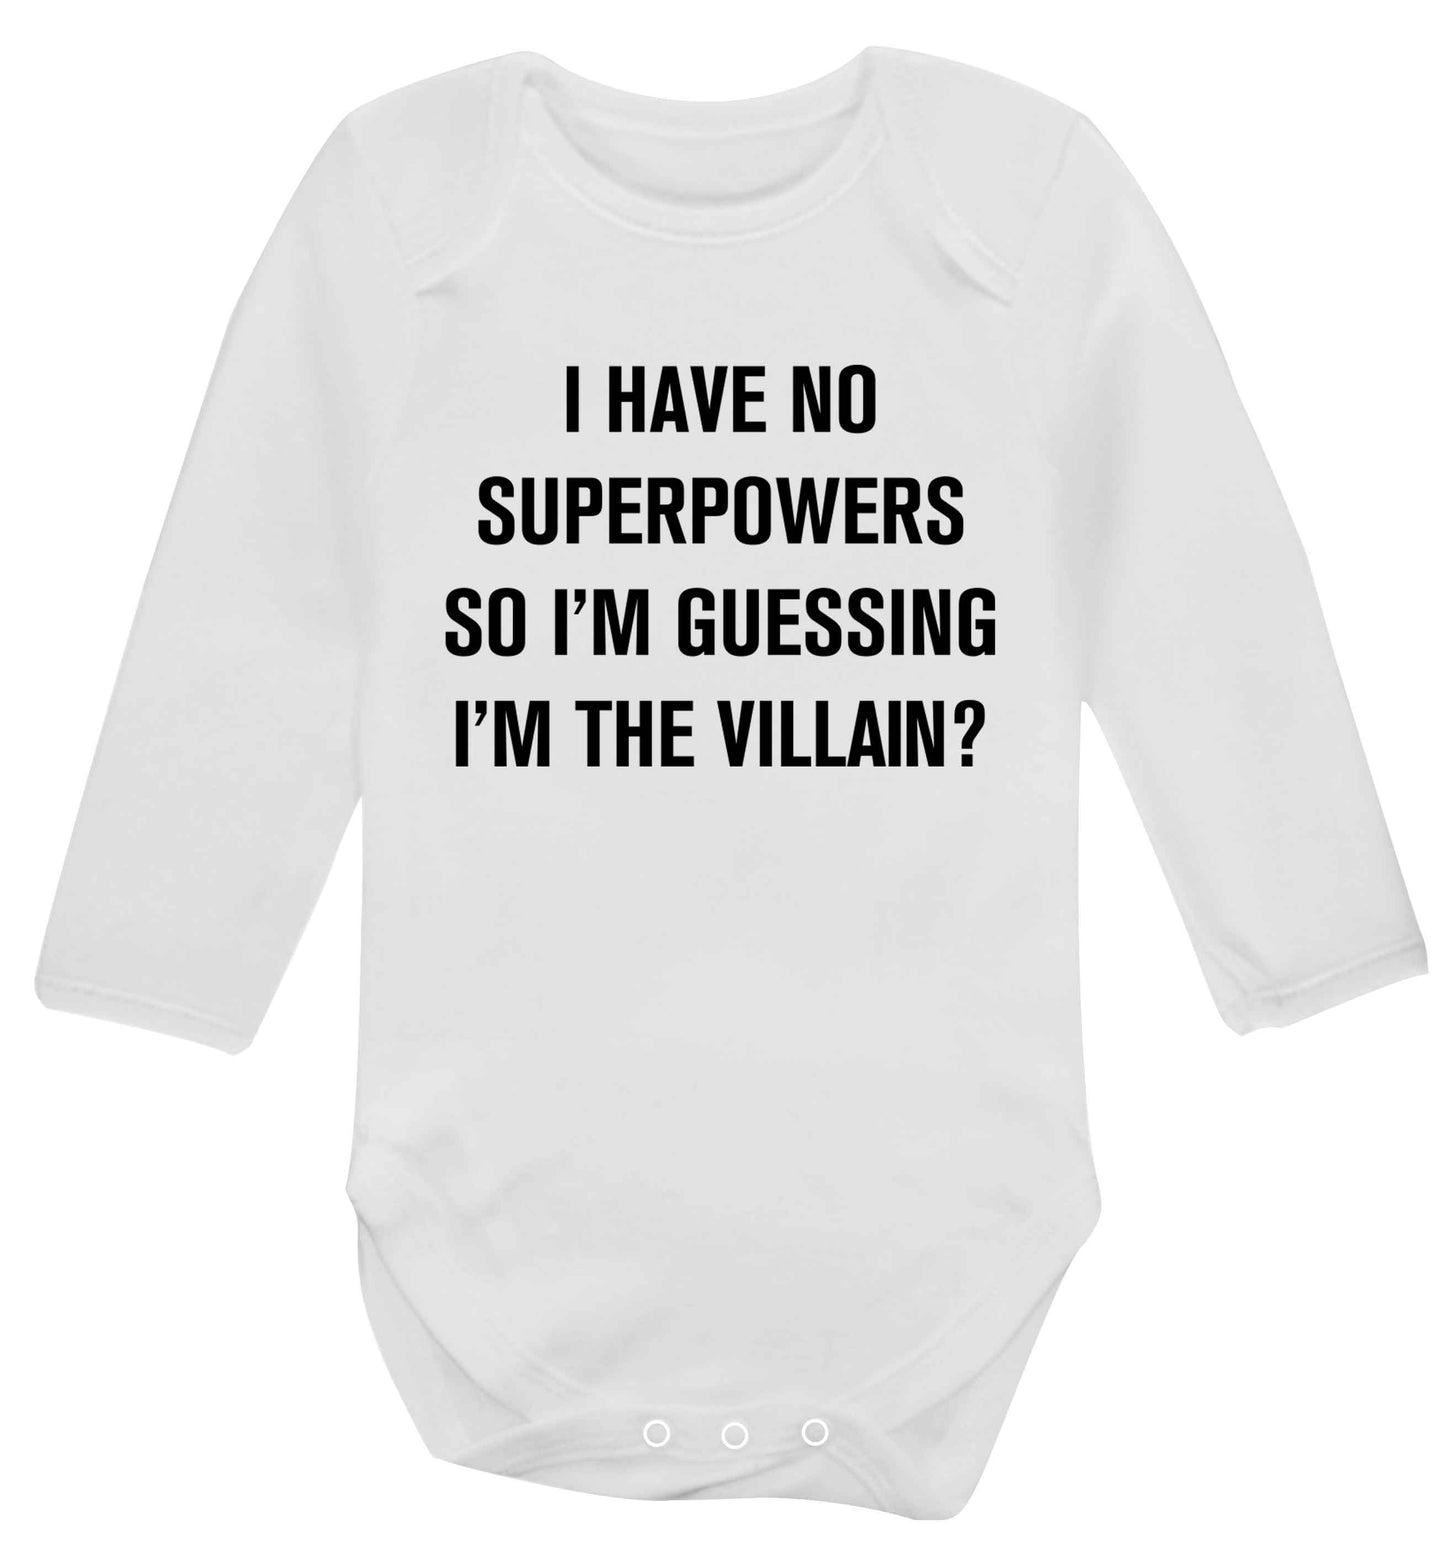 I have no superpowers so I'm guessing I'm the villain? Baby Vest long sleeved white 6-12 months